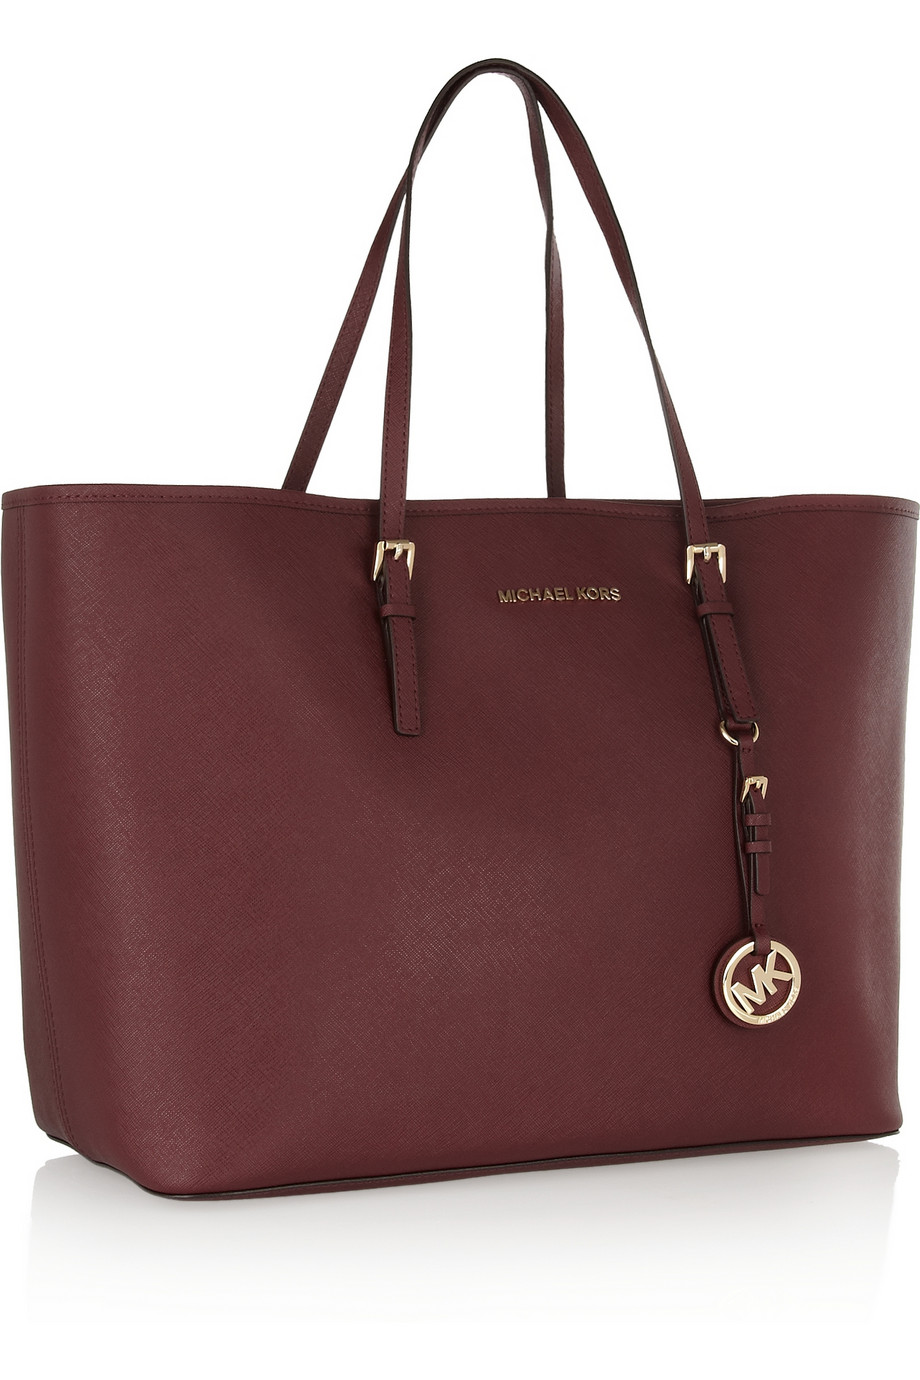 Michael Kors Jet Set Travel Large Chain Shoulder Tote in Maroon, Women's  Fashion, Bags & Wallets, Tote Bags on Carousell